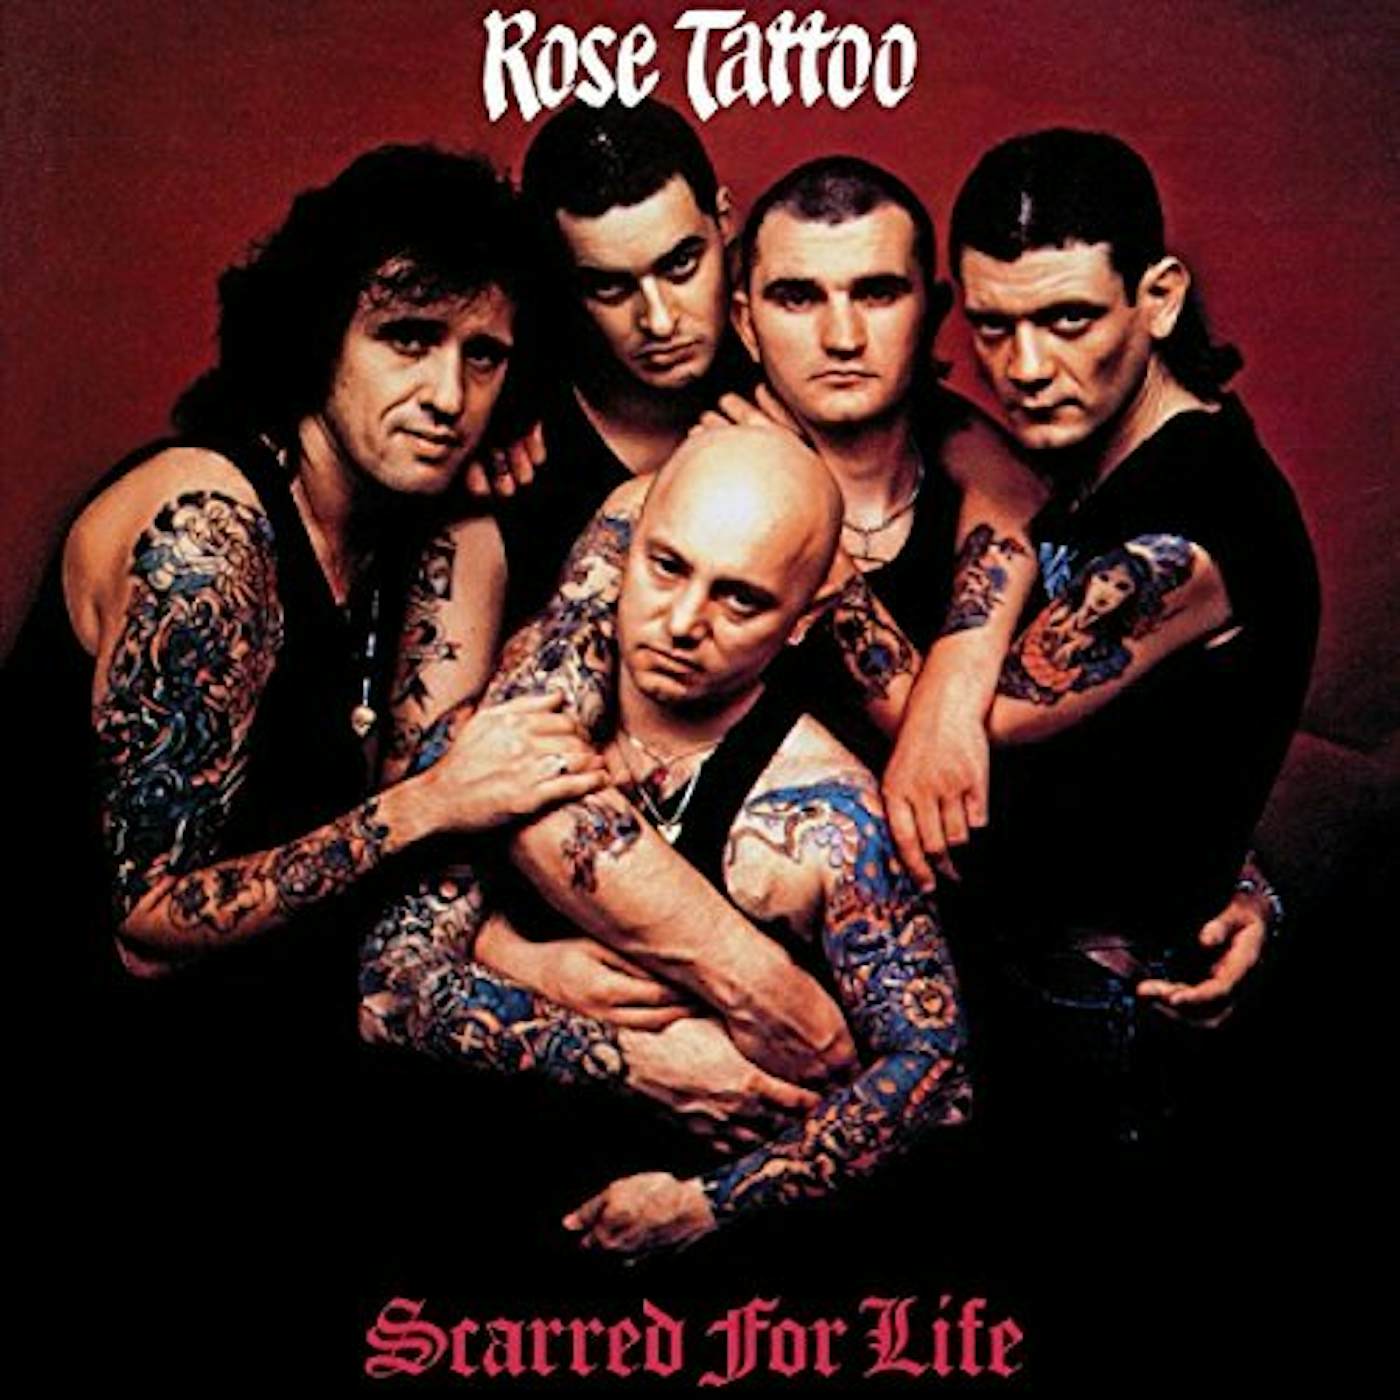 Rose Tattoo Scarred for Life Vinyl Record